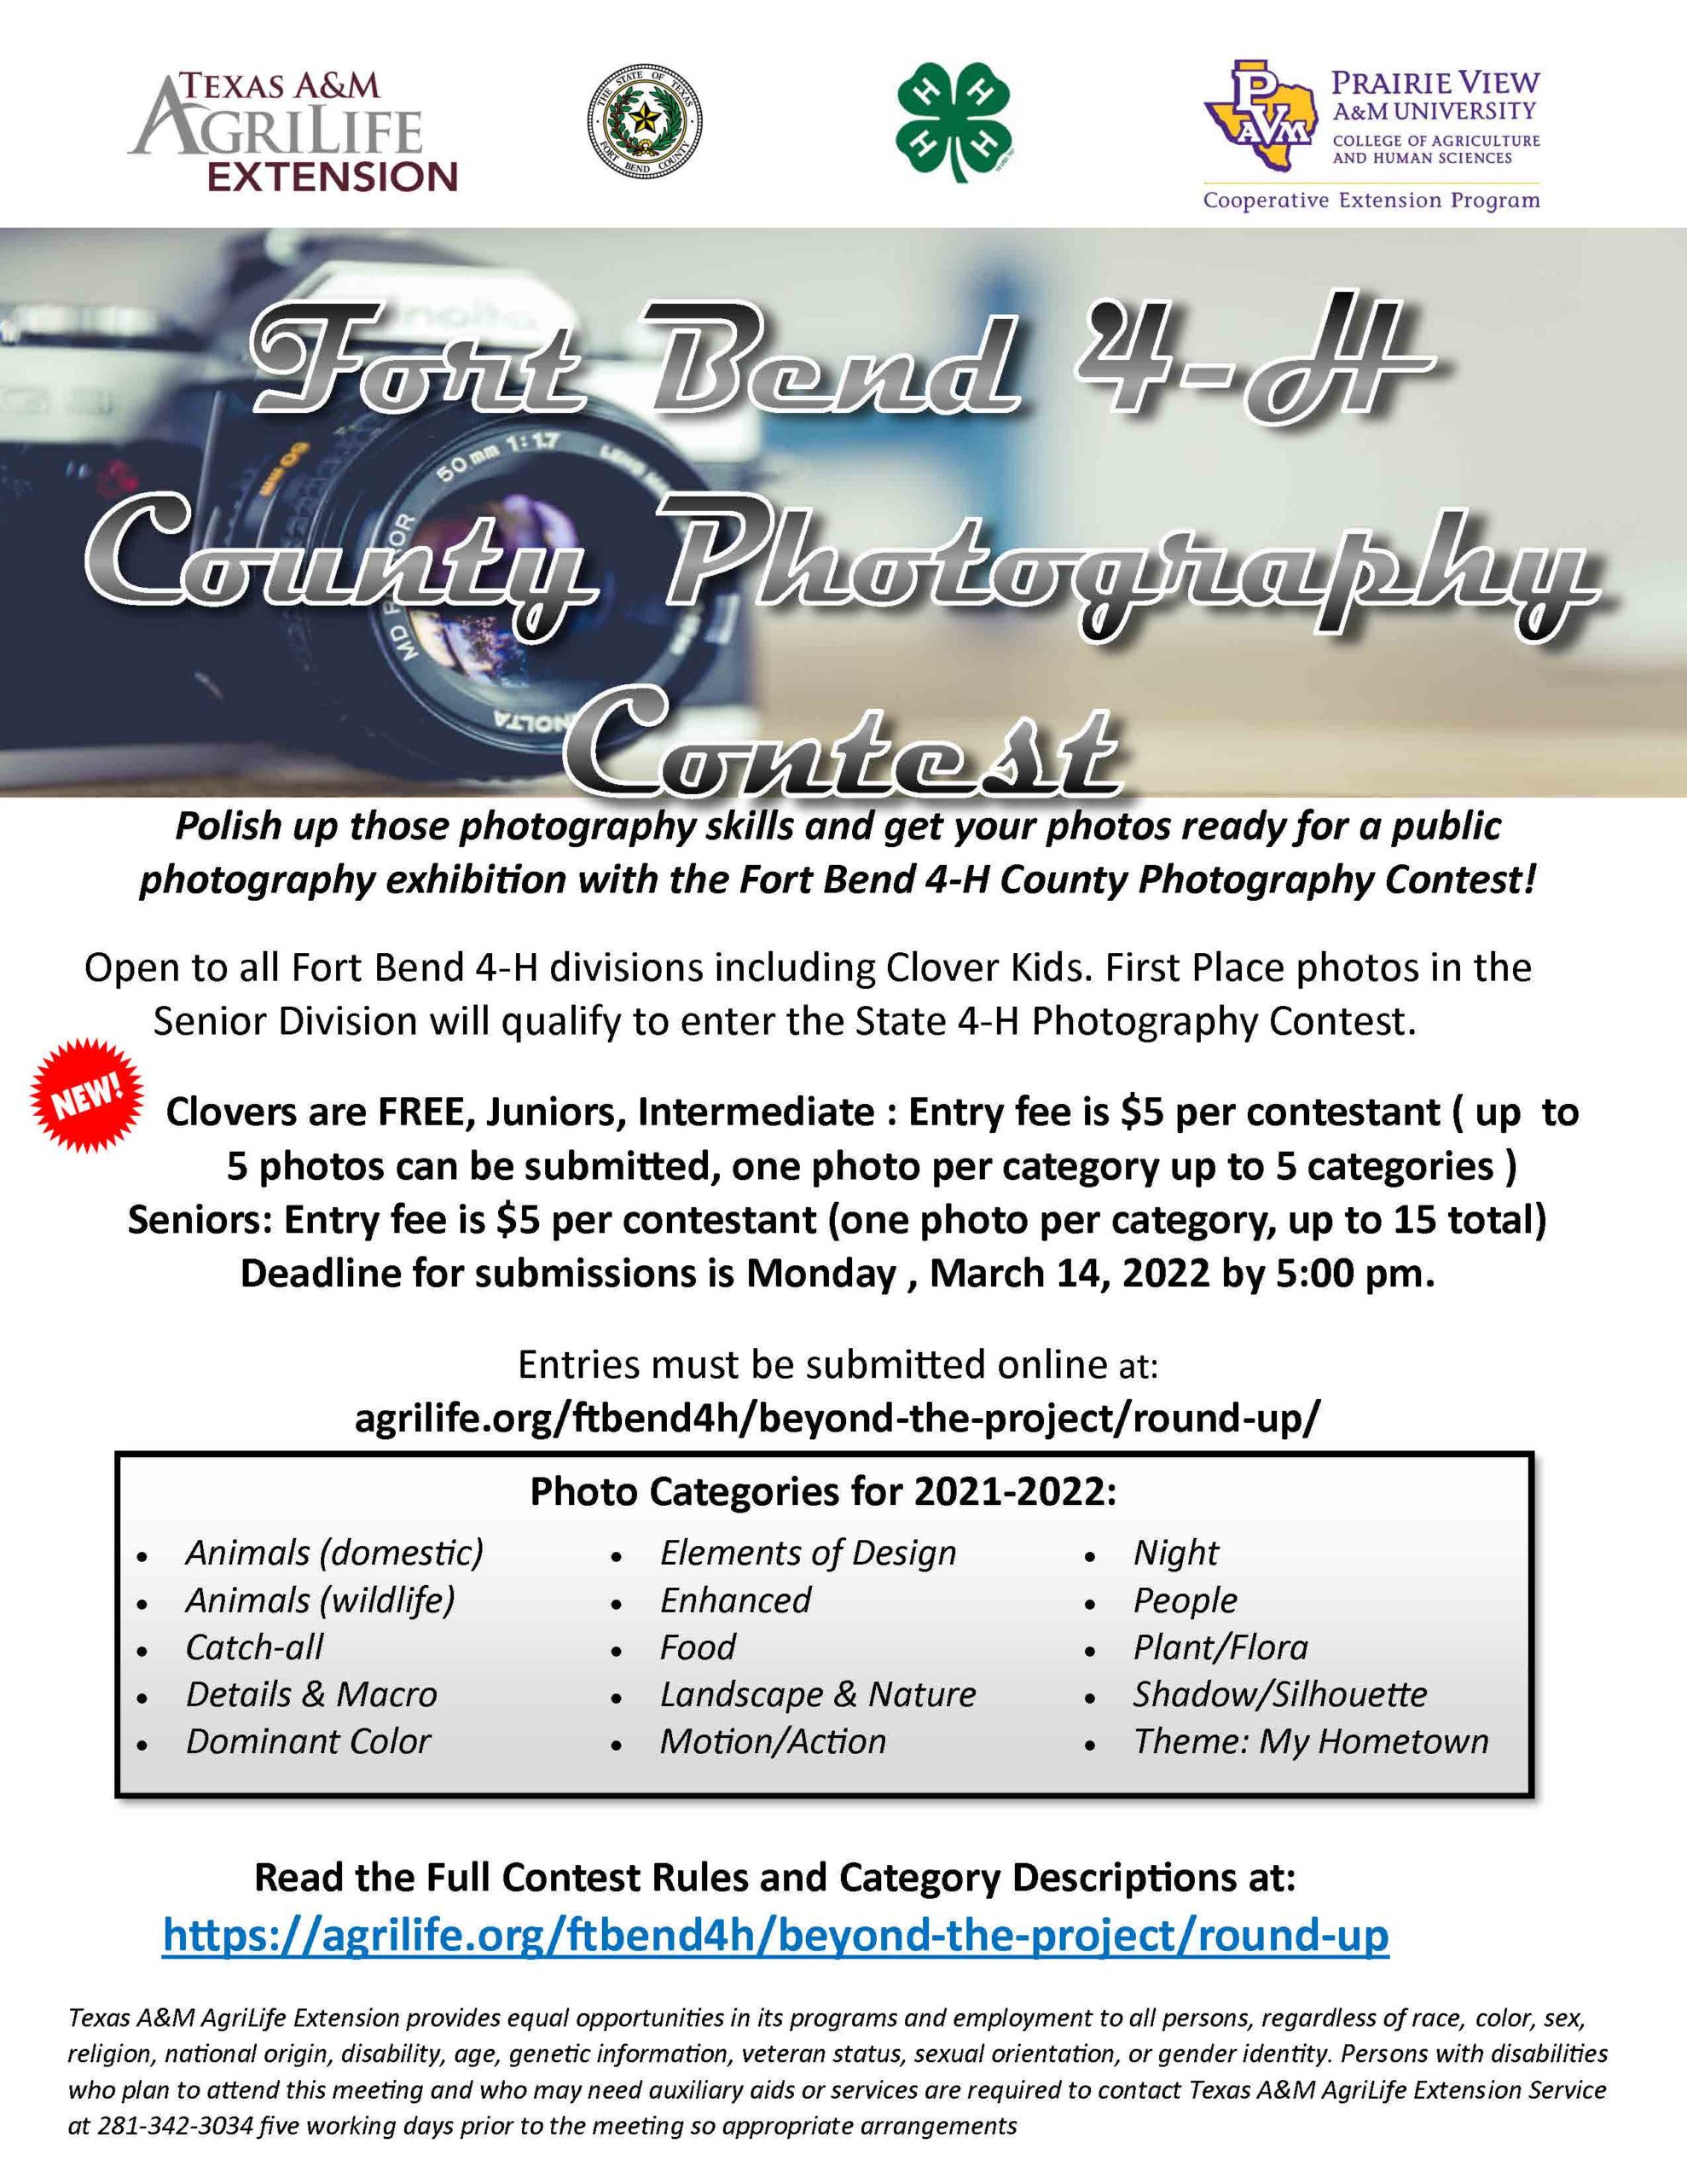 County Photography Contest 2021-2022